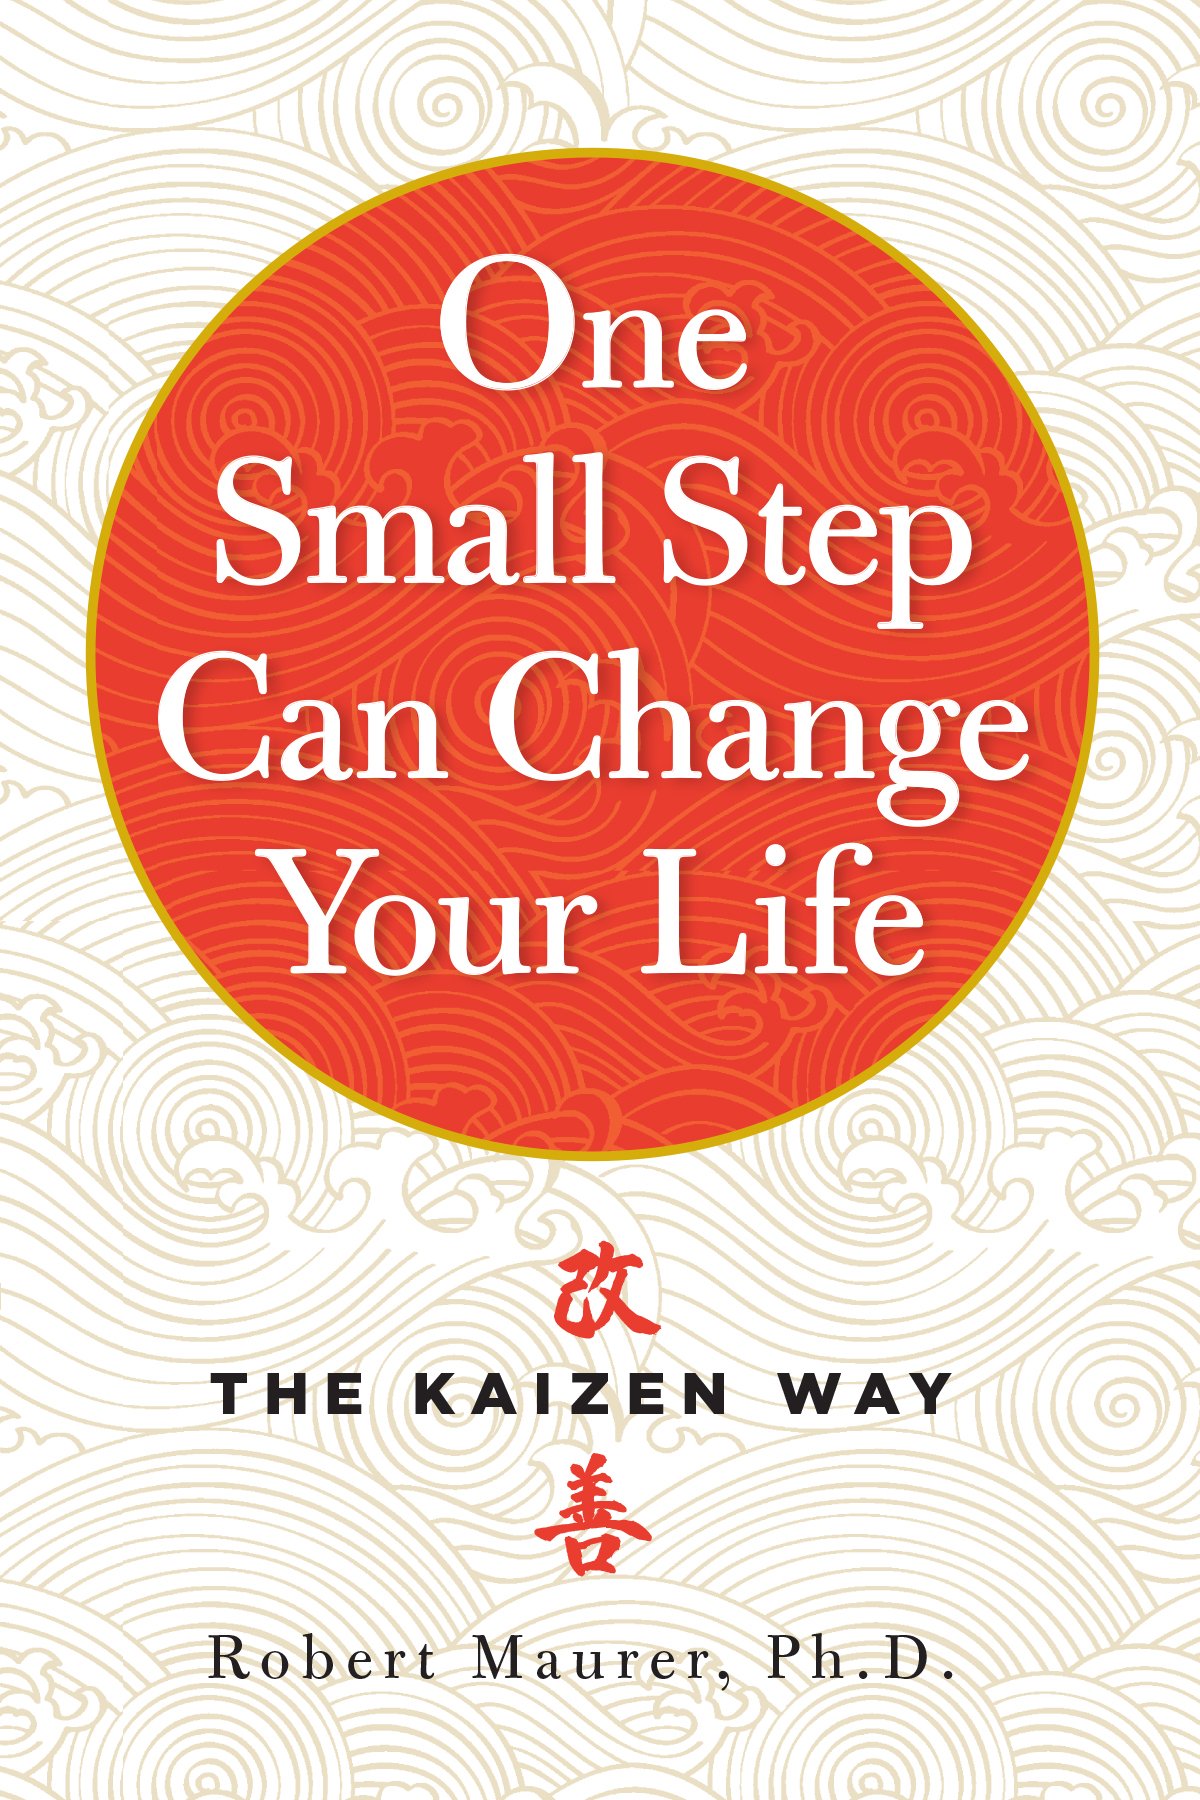 One Small Step Can Change Your Life | Robert Maurer